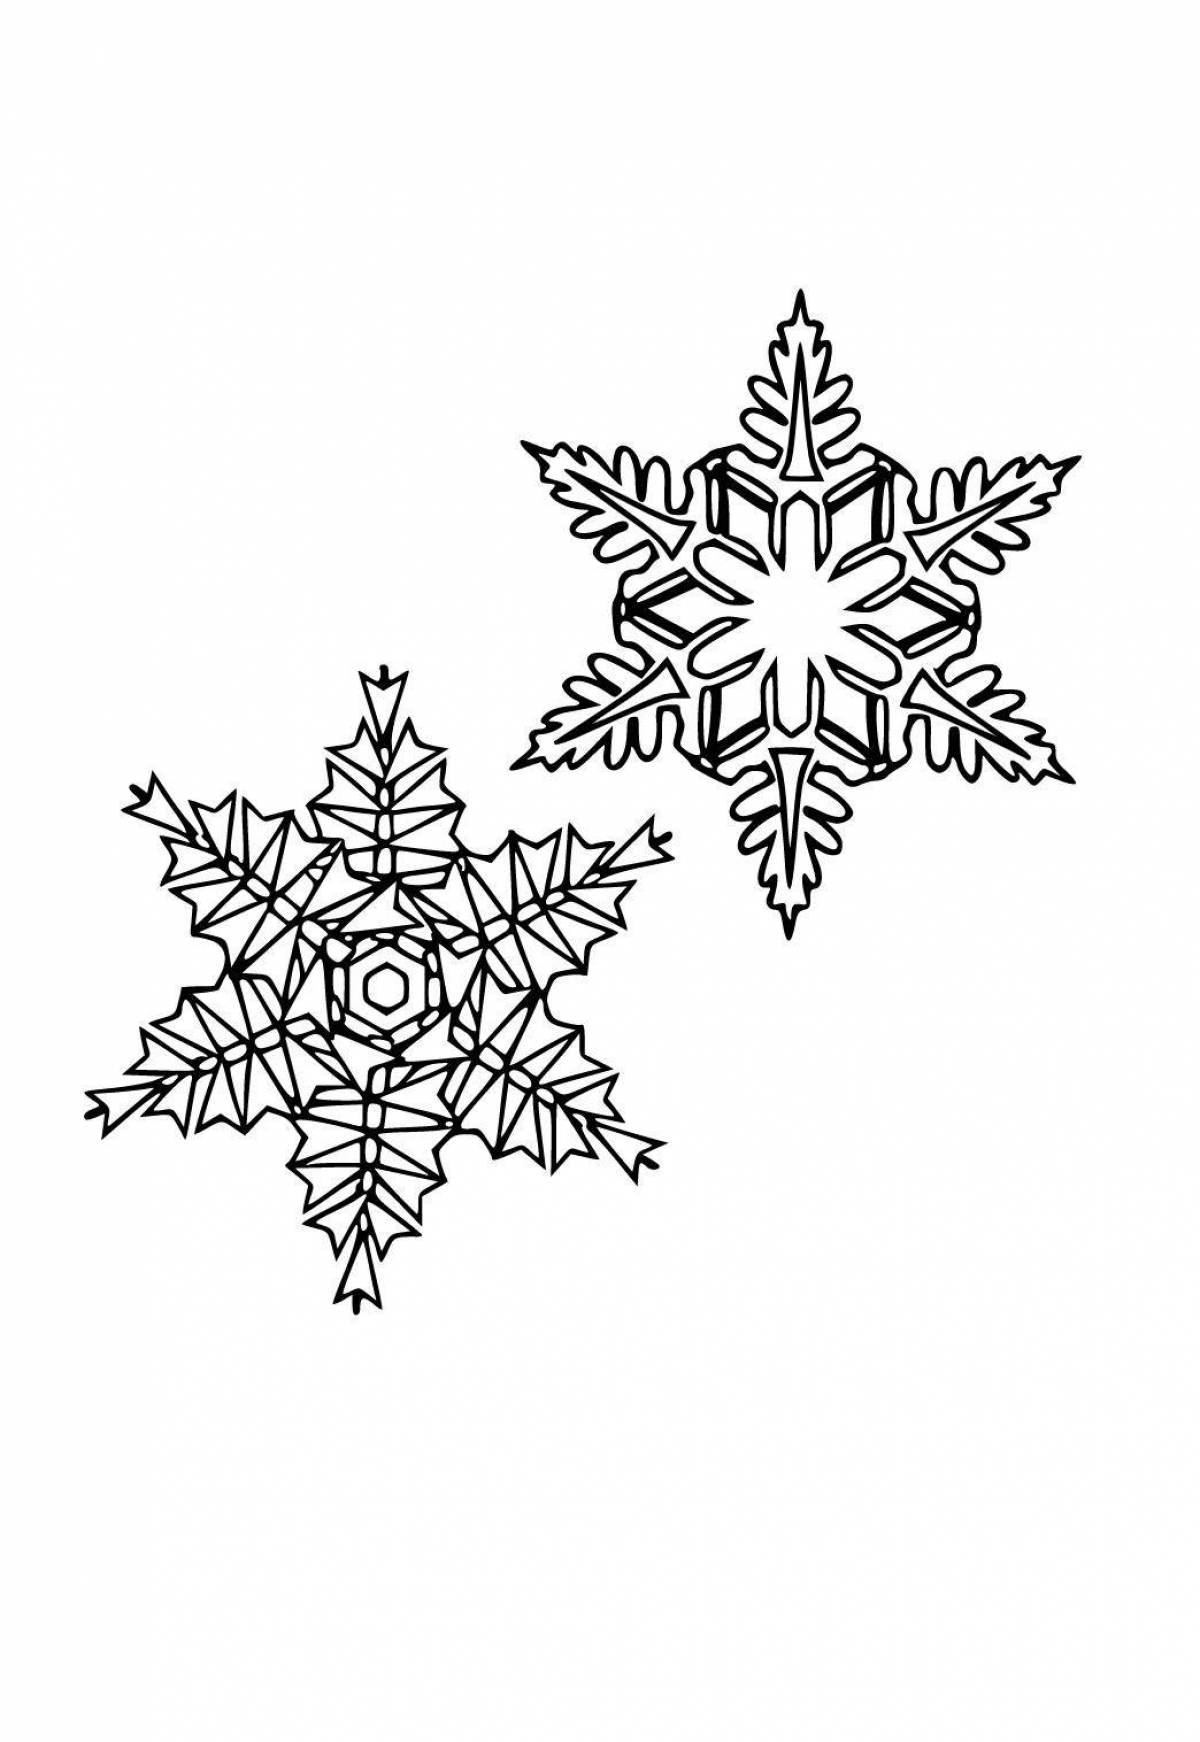 Fine winter patterns coloring book for kids